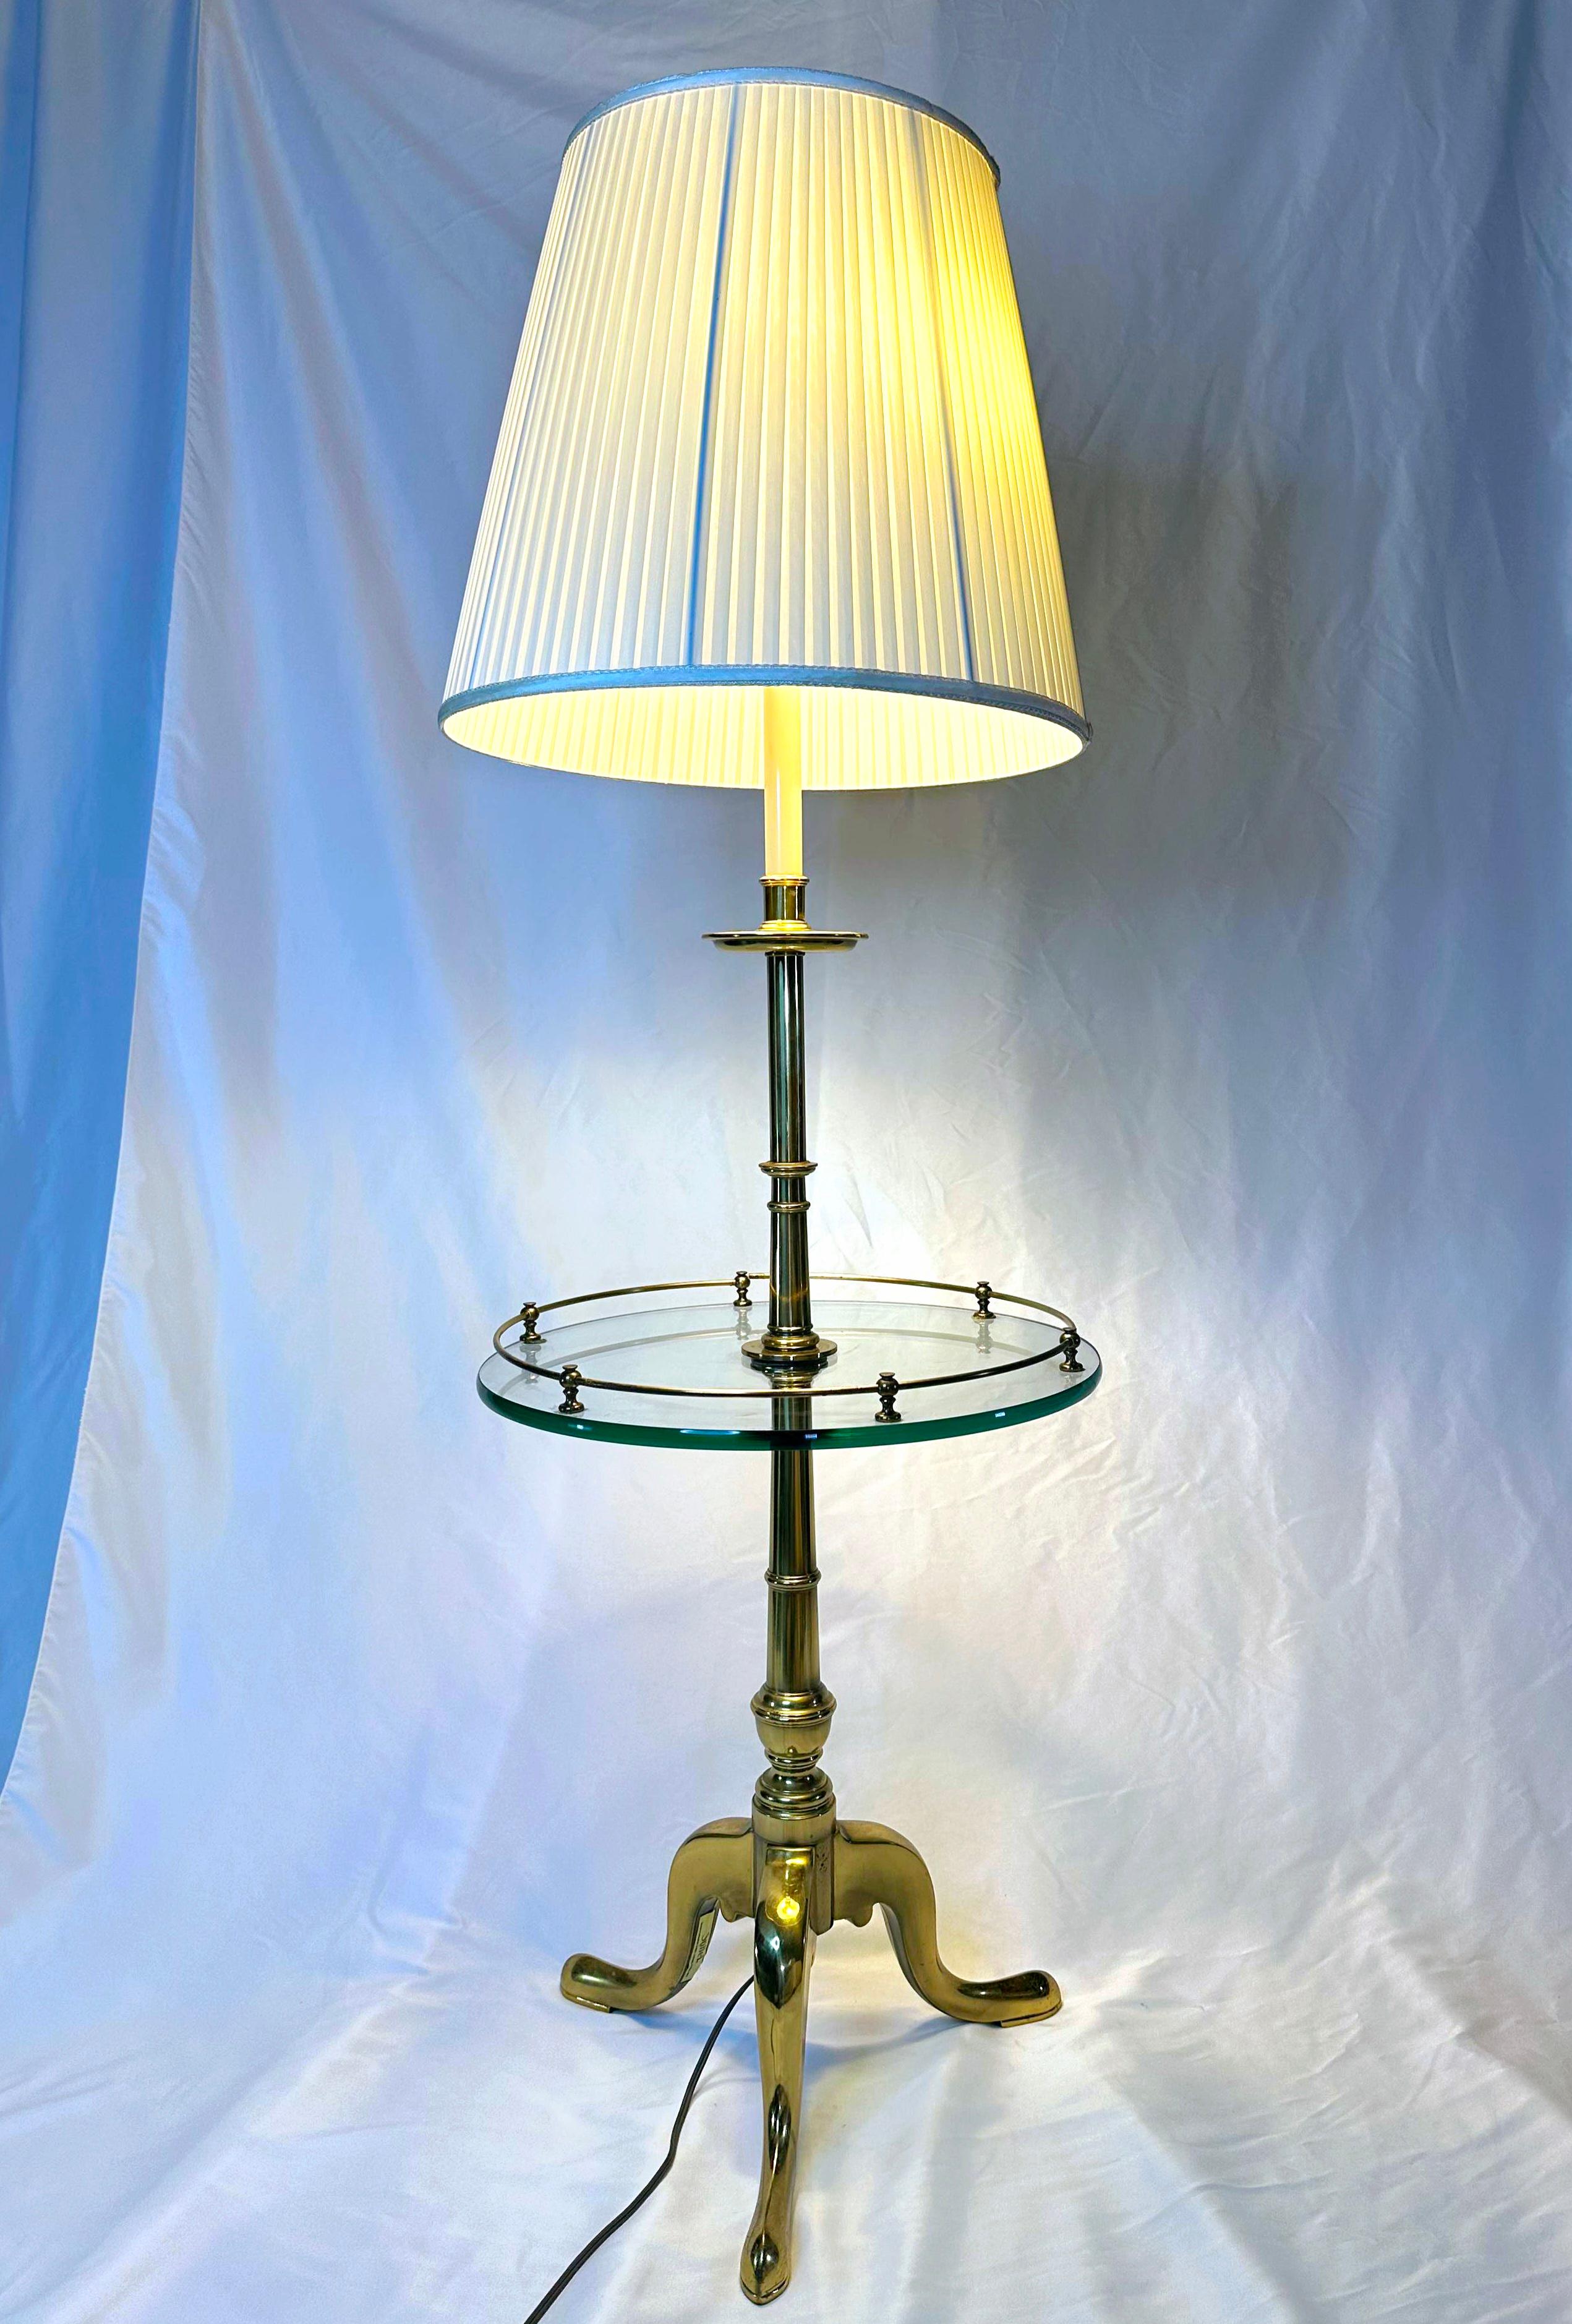 French Provincial Stiffel Floor Lamp With Glass Table and tripod legs For Sale 31